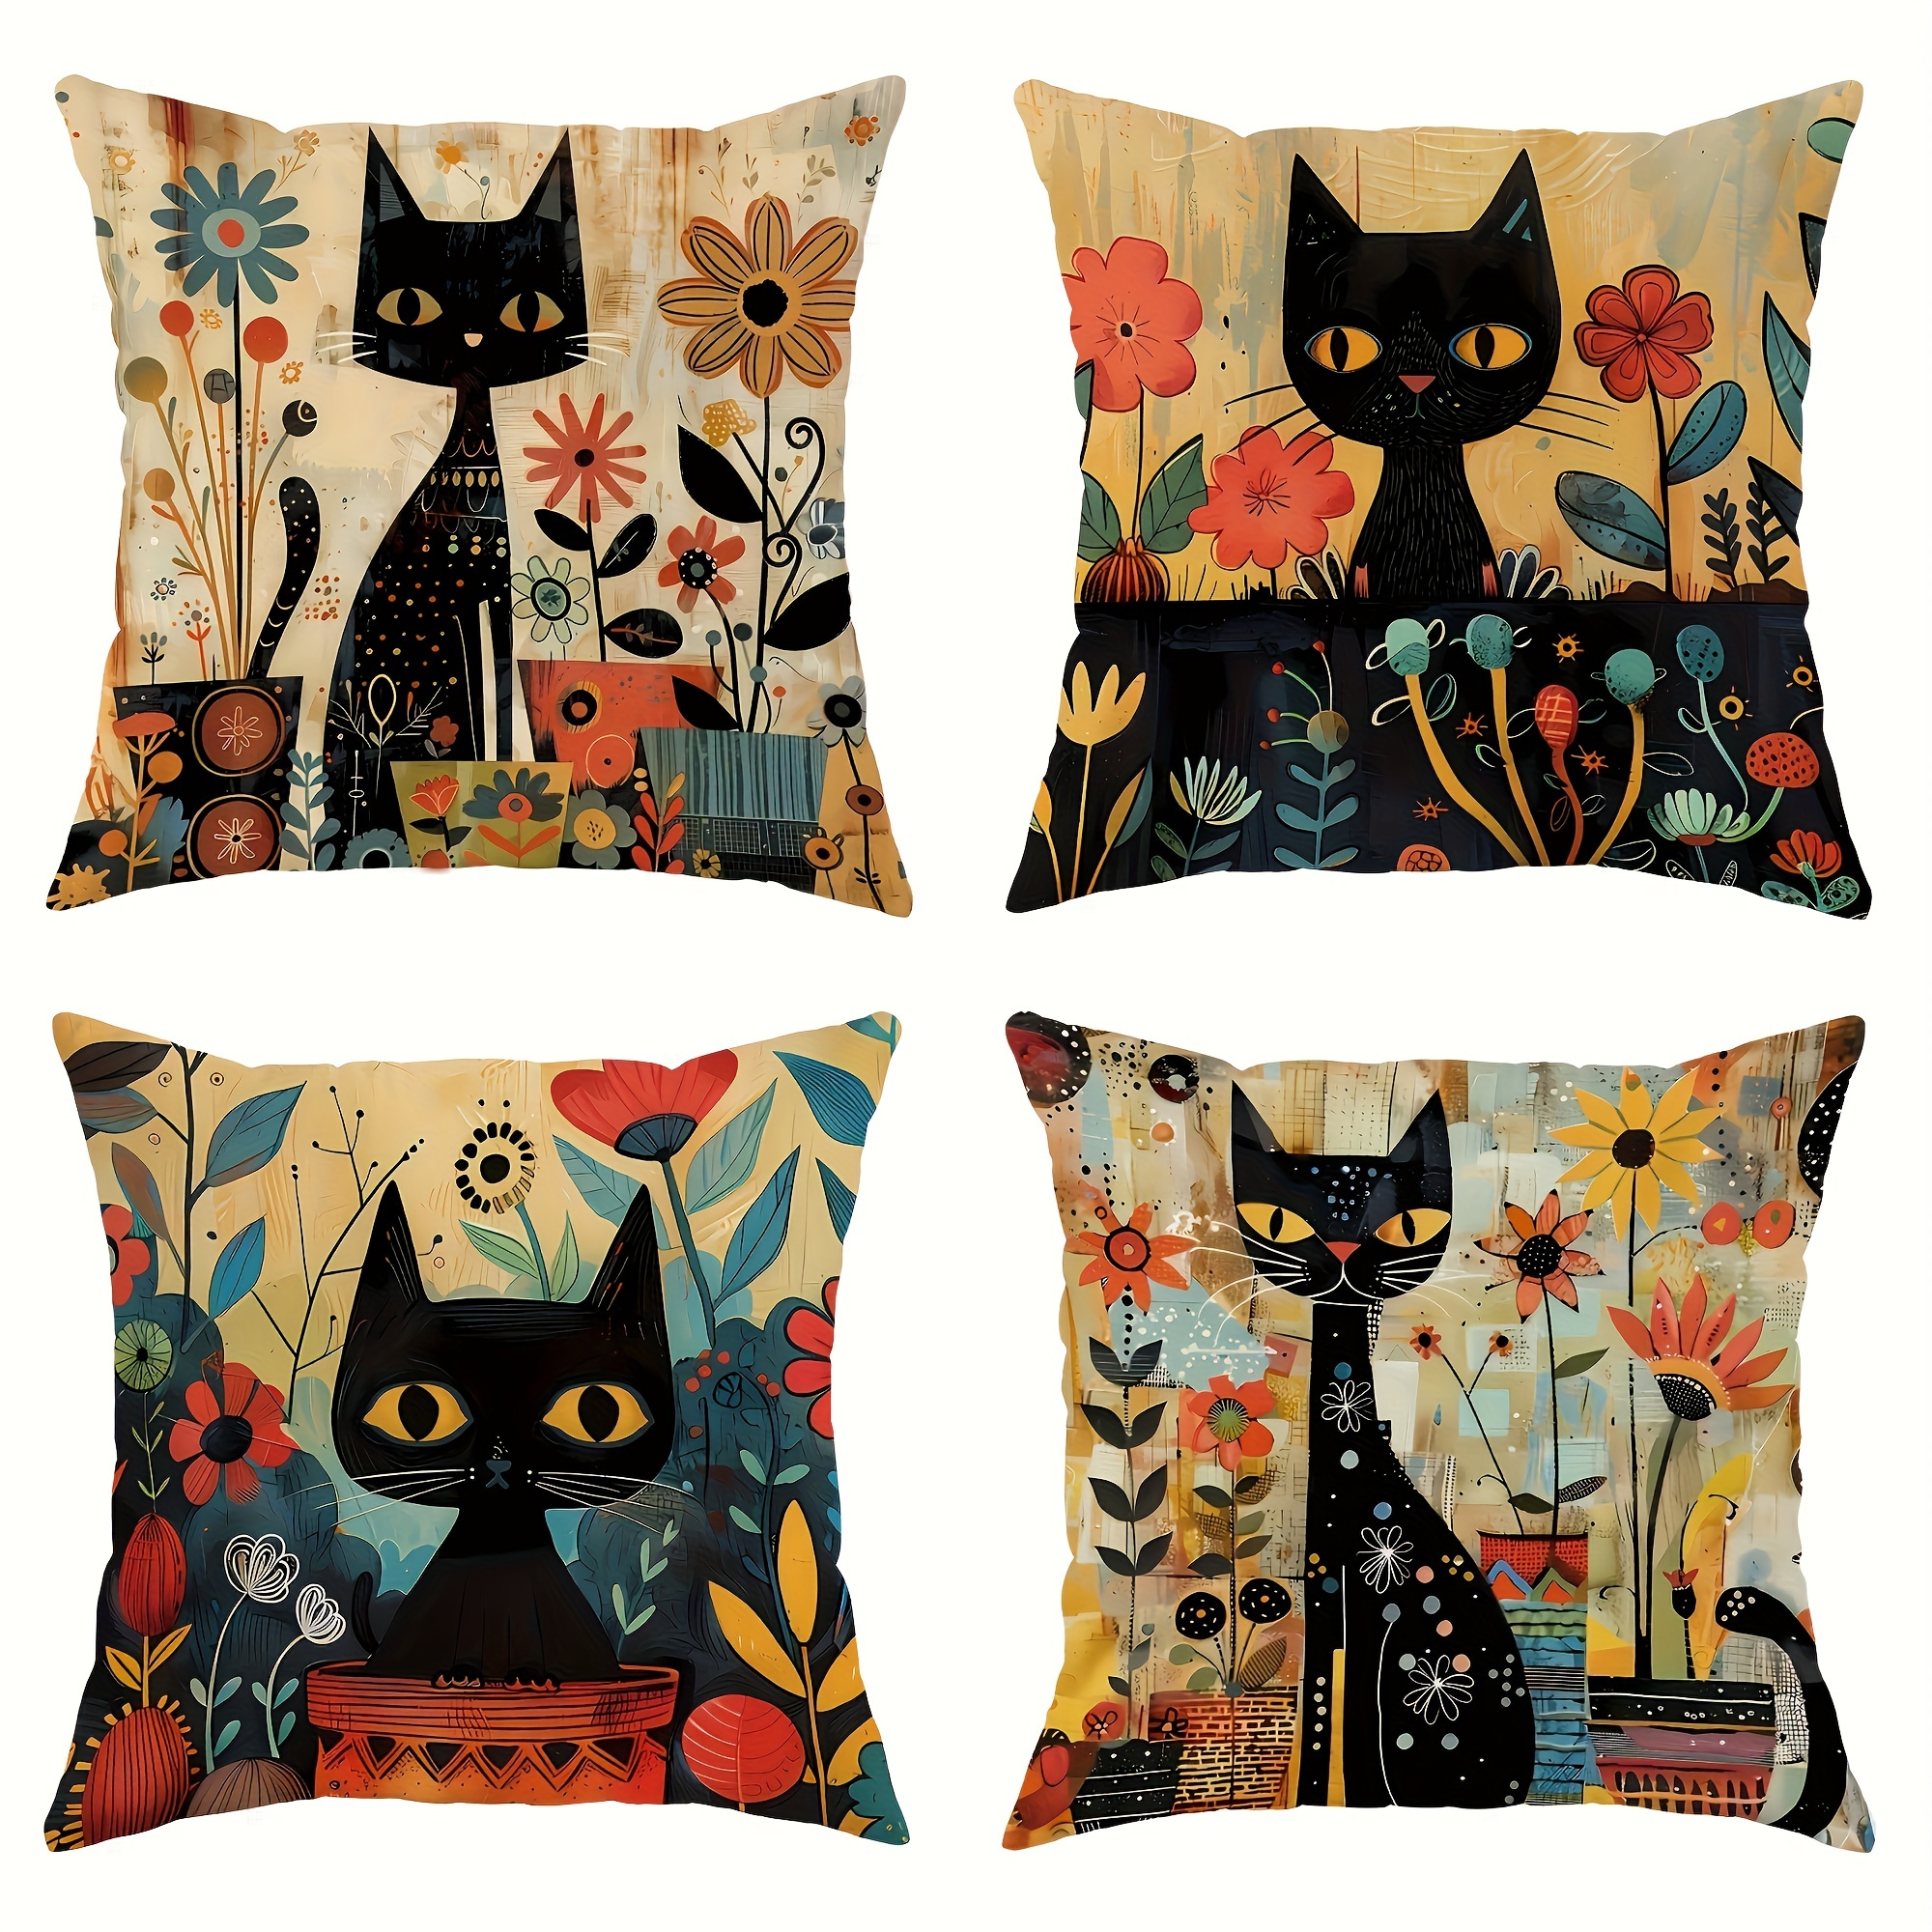 

4-piece Set Black Cat & Floral Throw Pillow Covers - Mid-century Abstract Design, 18x18 Inches With Zipper Closure - Ideal For Living Room And Bedroom Decor (cushion Inserts Not Included)